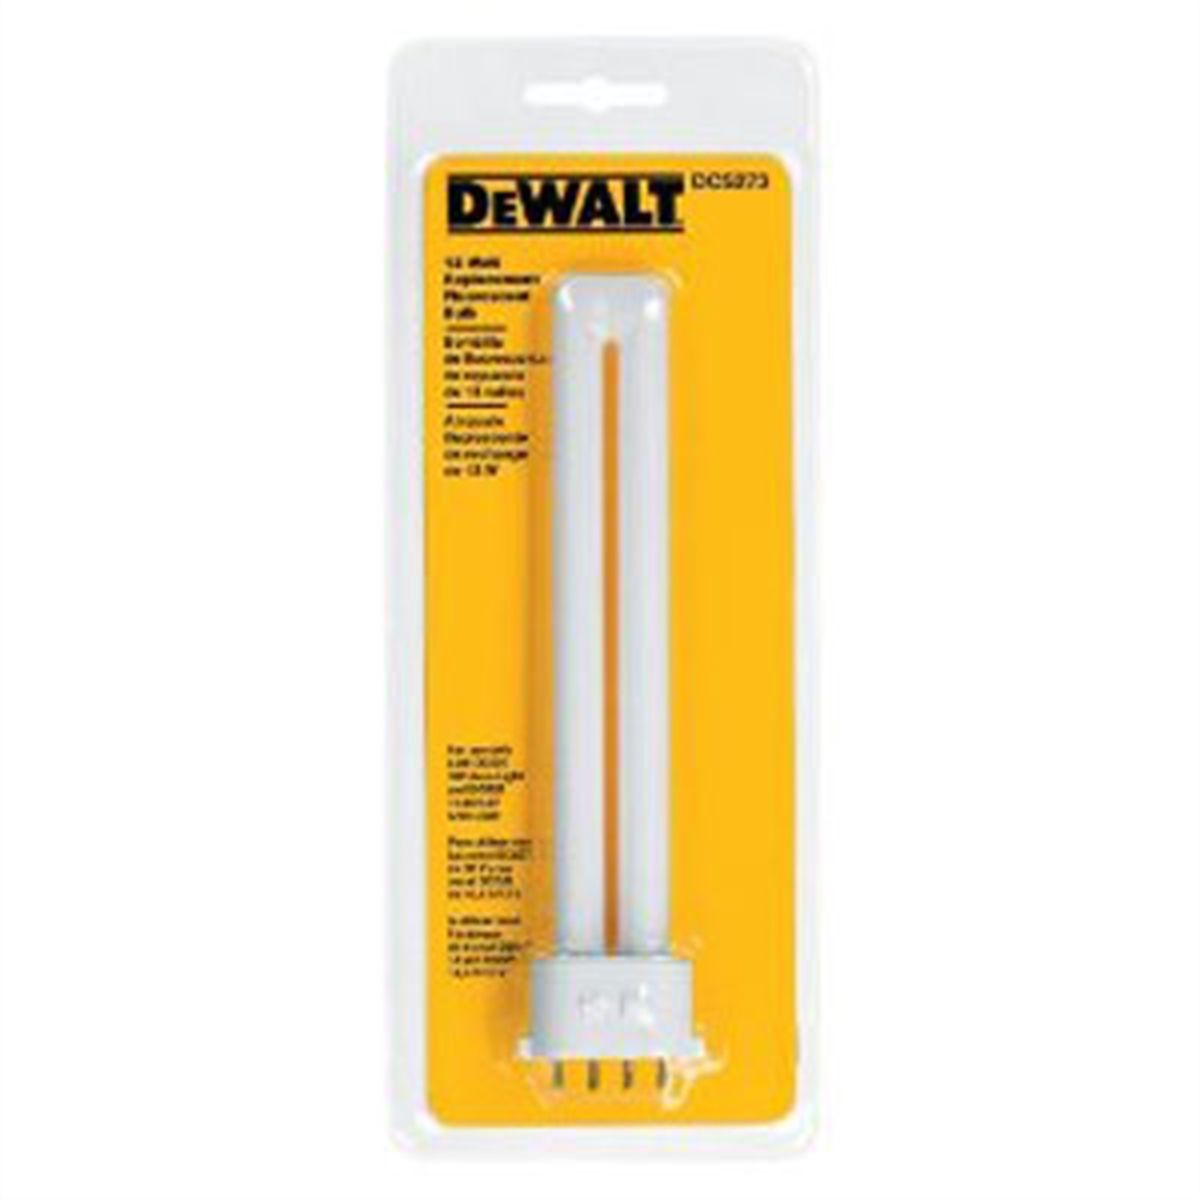 13 Watt Fluorescent Replacement Bulb for DC527 and...